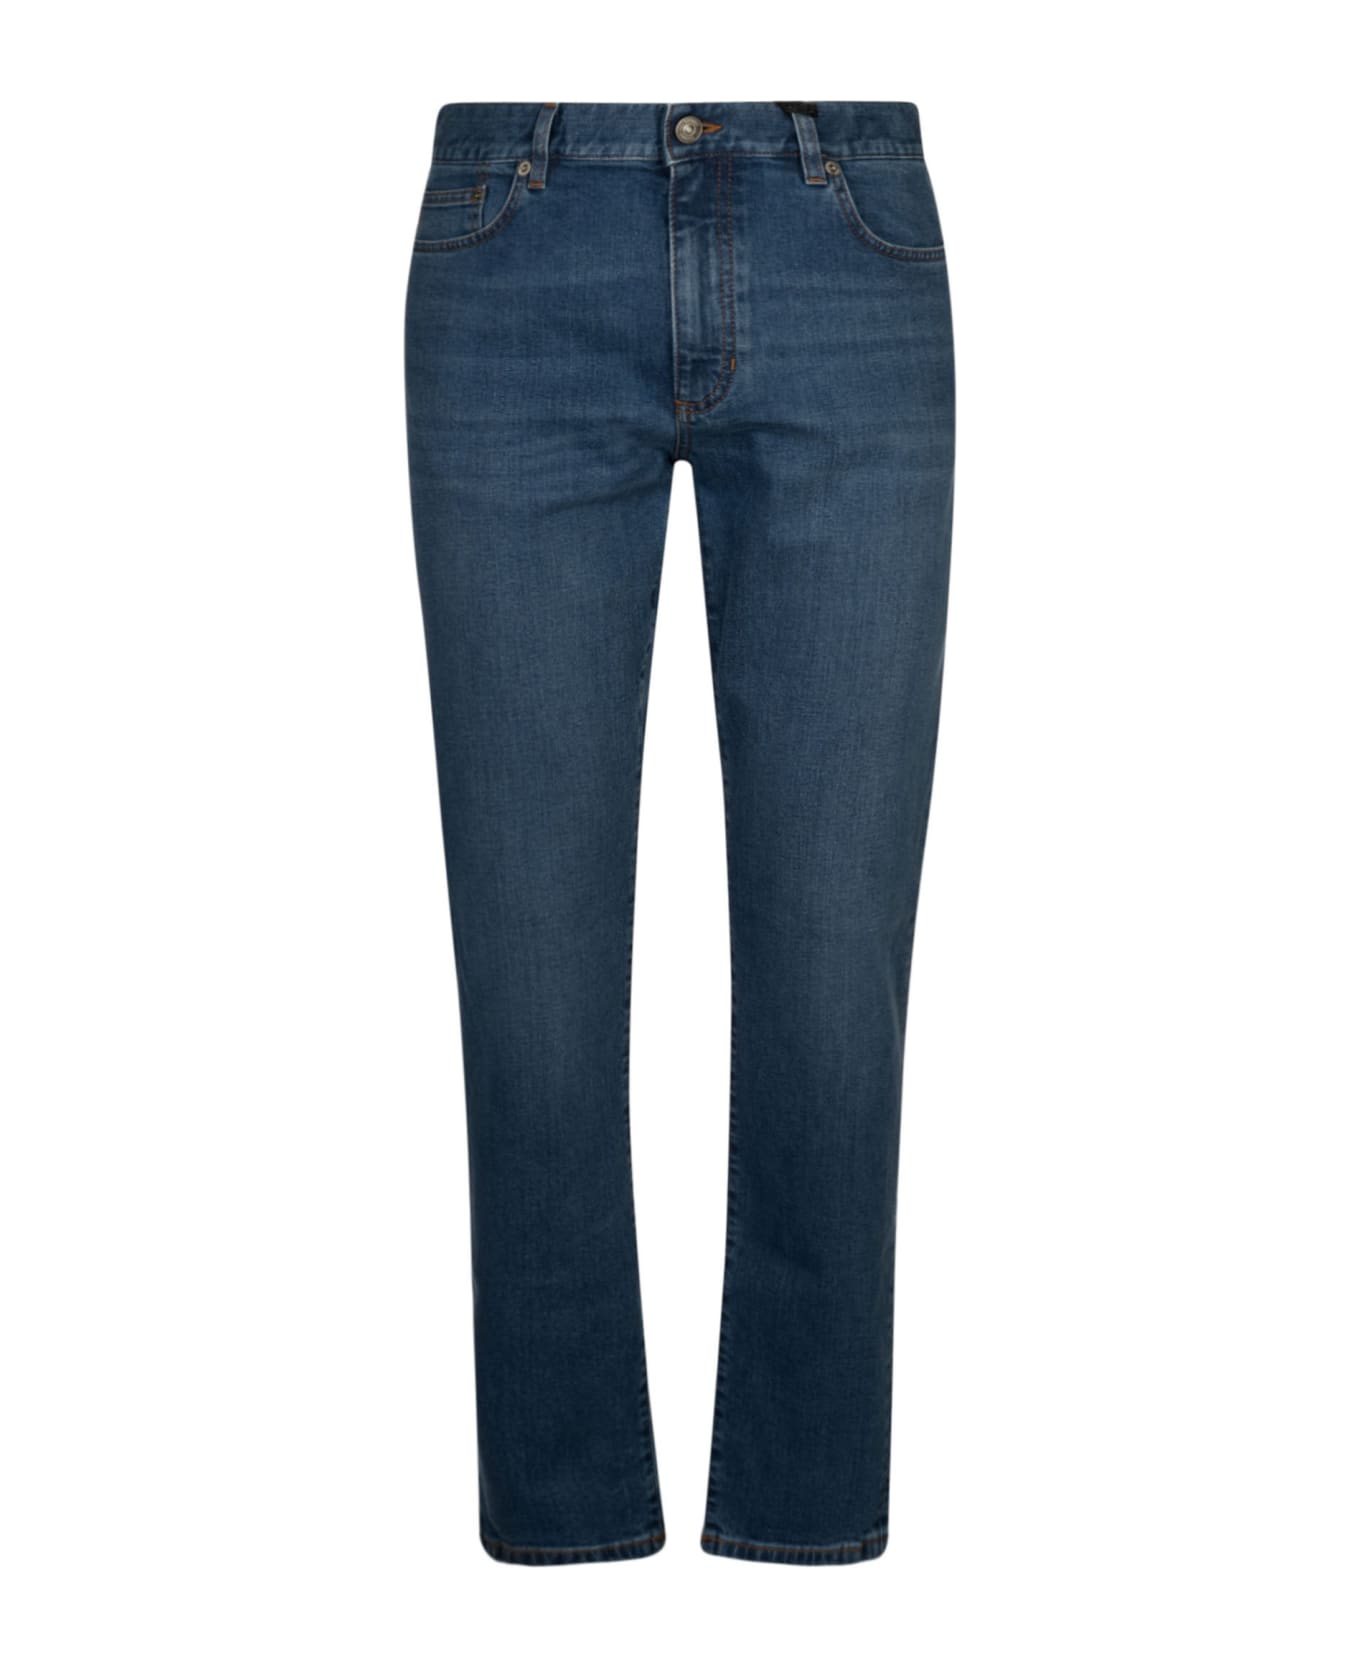 Zegna Fitted Buttoned Jeans - C